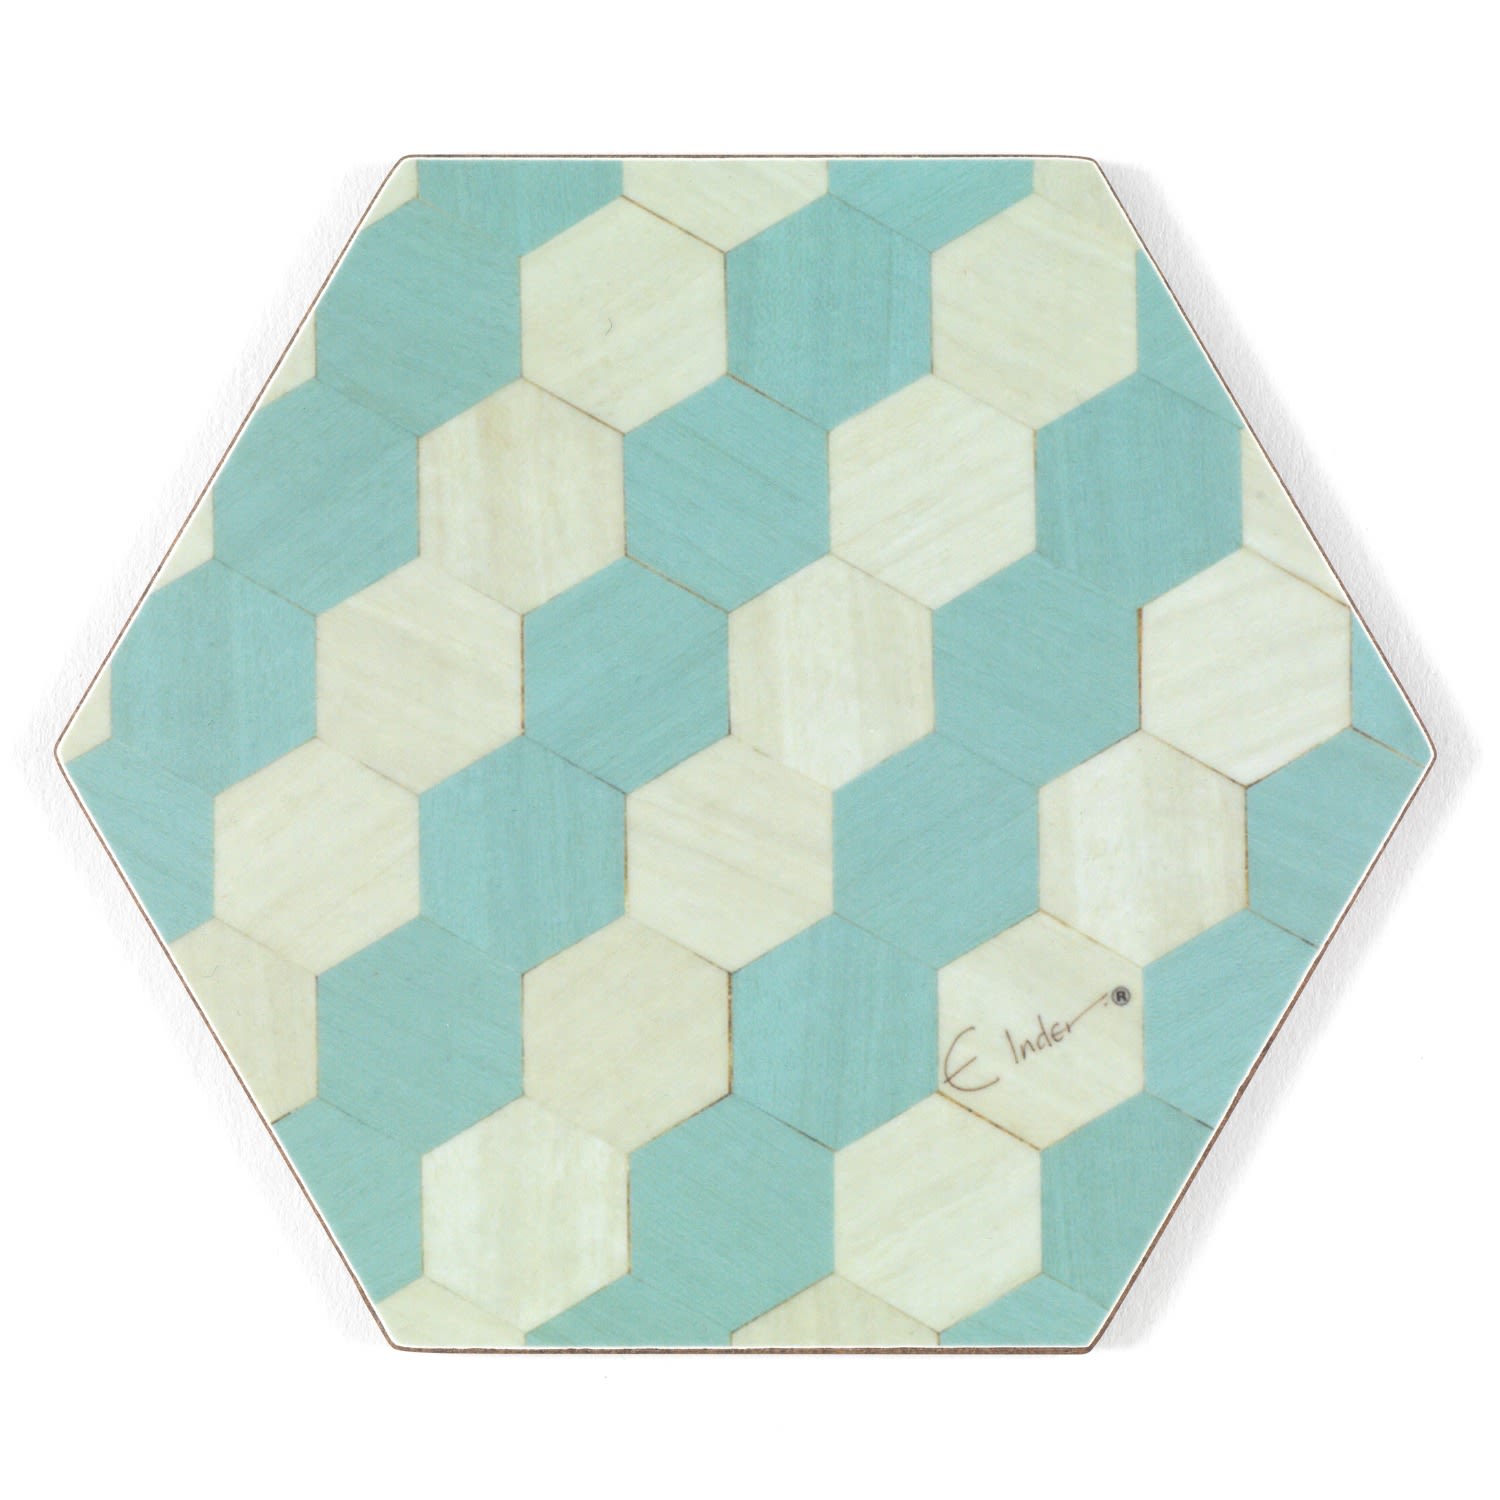 Six Coasters In Scandinavian Style Hexagonal Design. Light Blues. Heat Resistant Melamine. Tied With Ribbon For Gifting. E. Inder Designs